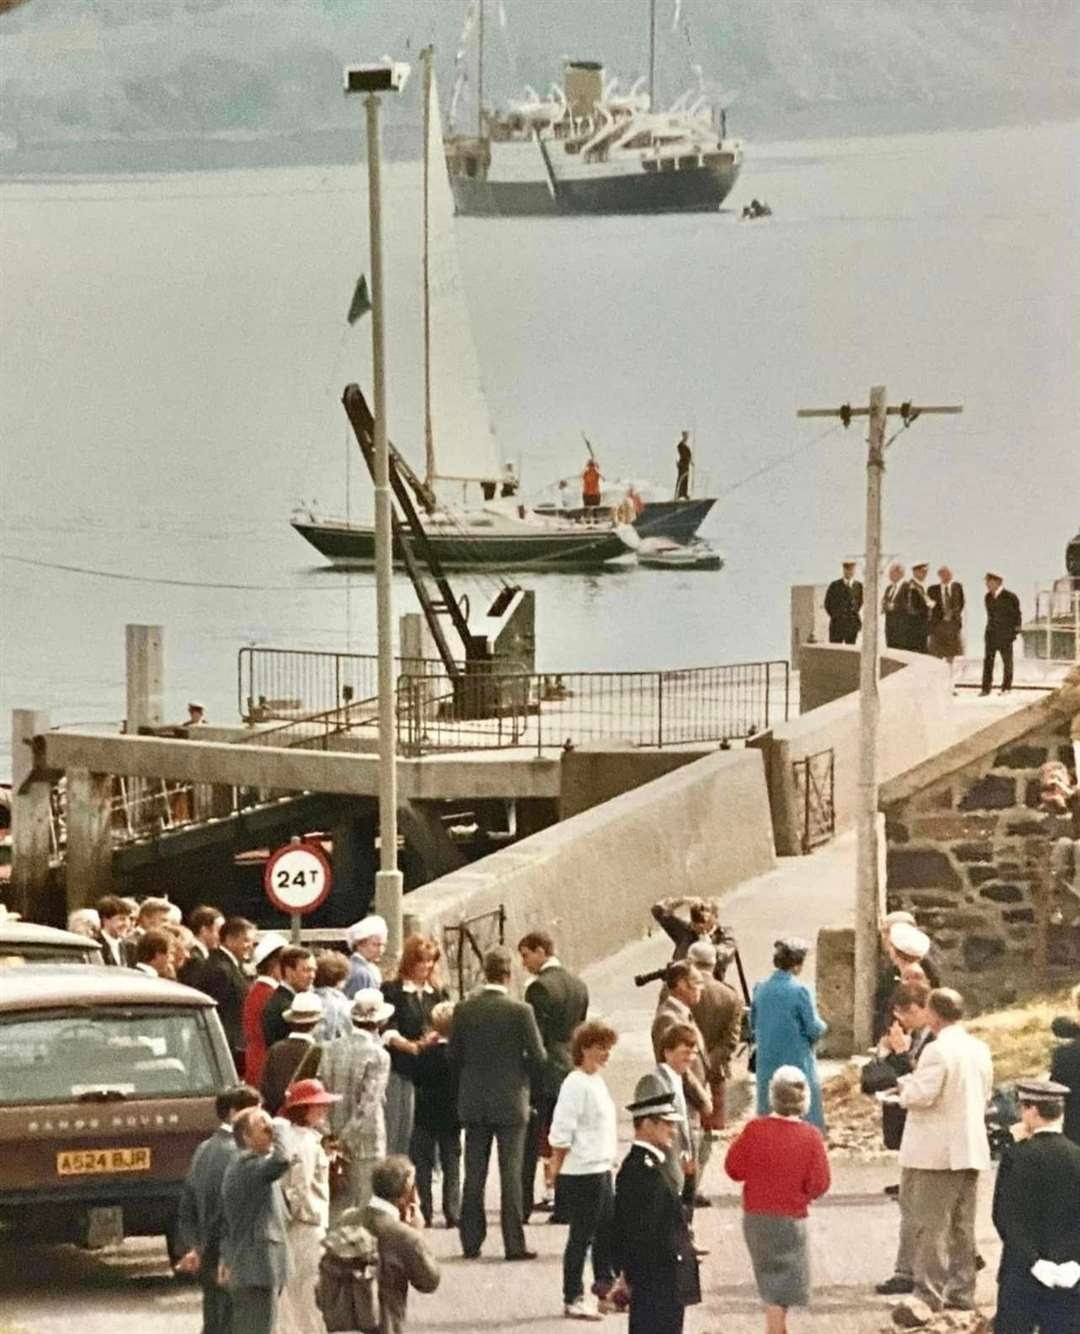 The Royal Party set to depart for the Royal Yacht Britannia with Sarah Ferguson and Prince Andrew visible in the foreground.